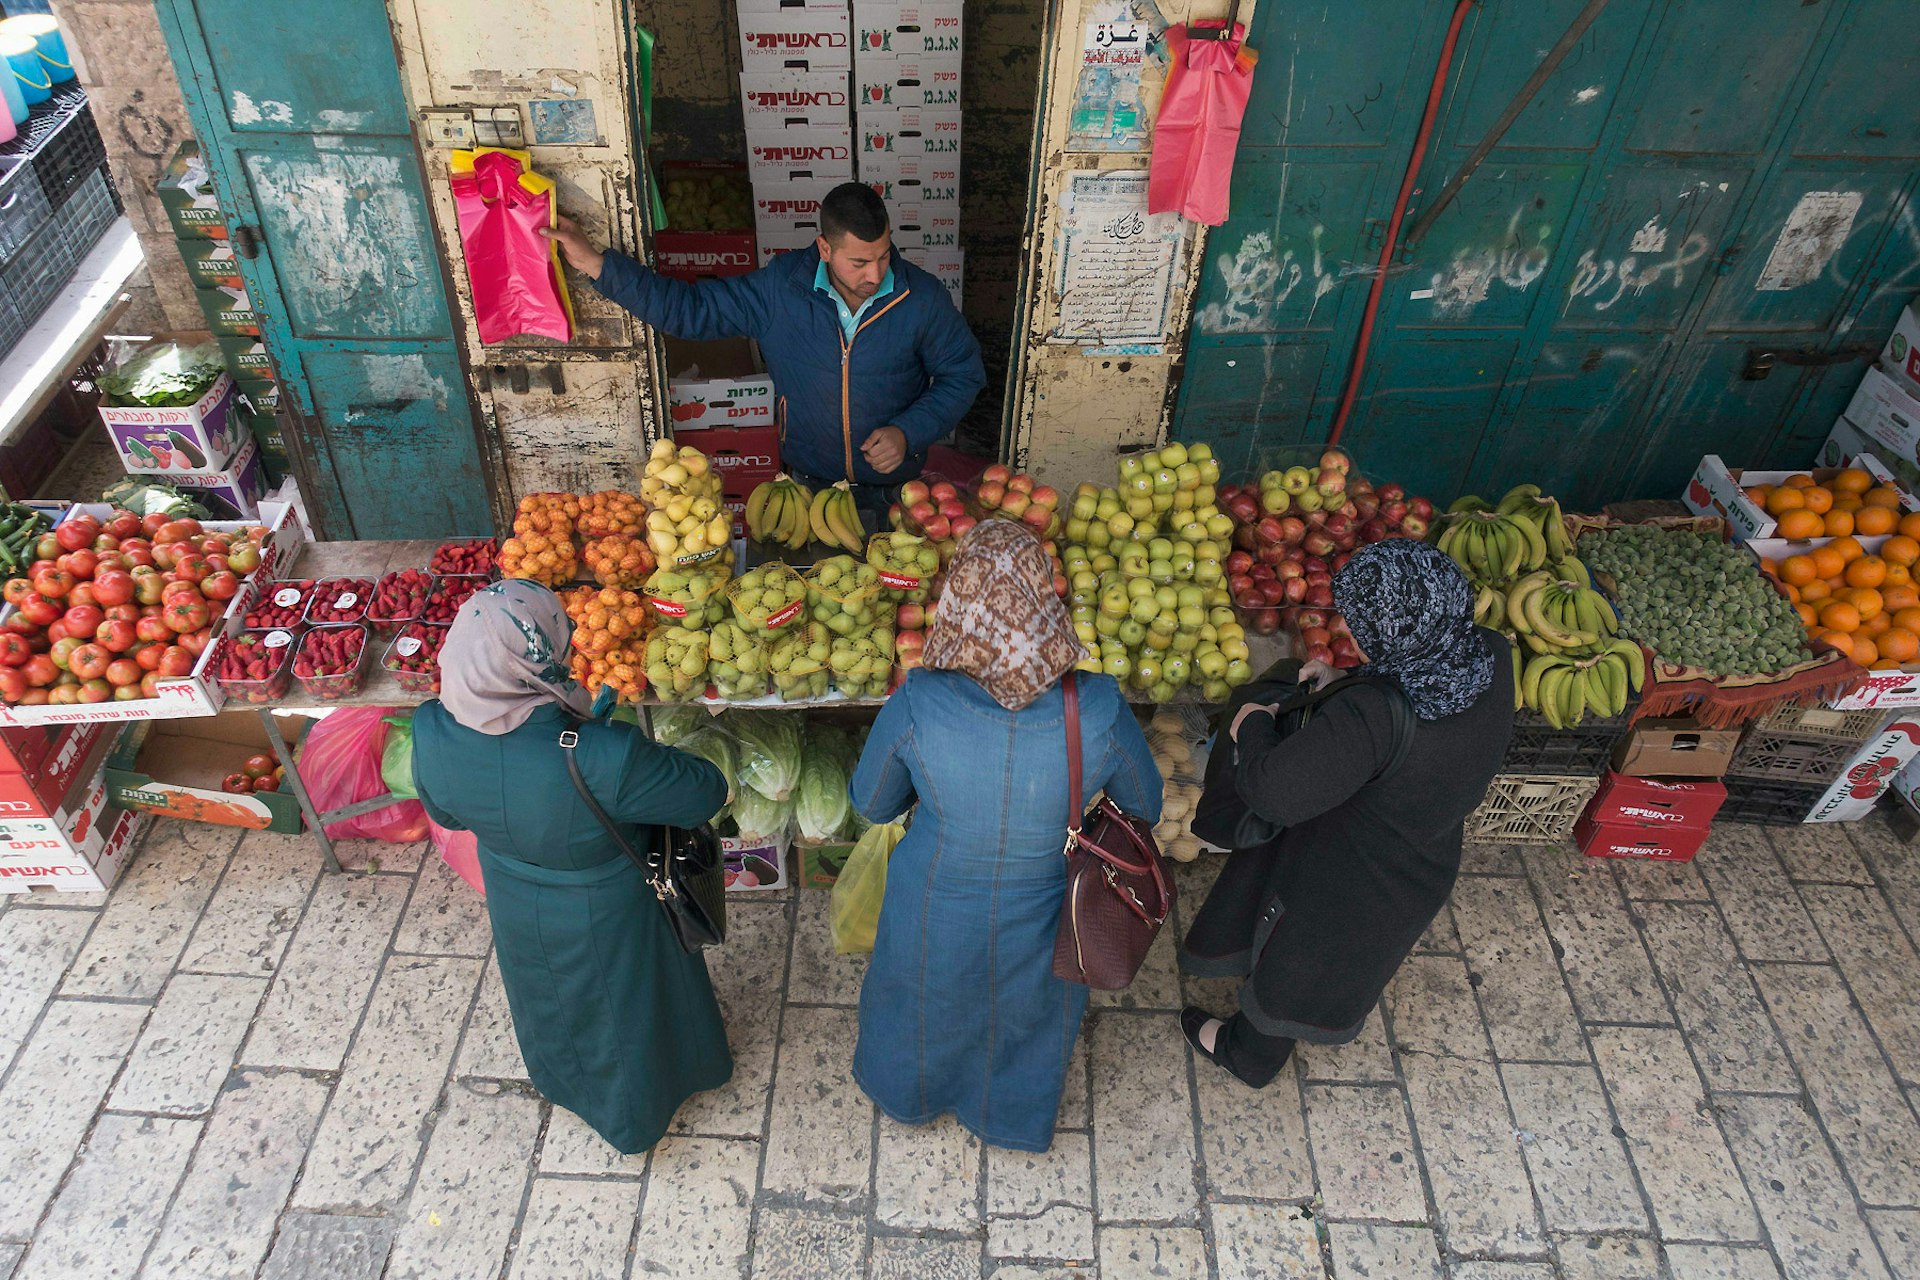 Women shop for fruit next to Jaffa Gate in the Old City Jerusalem